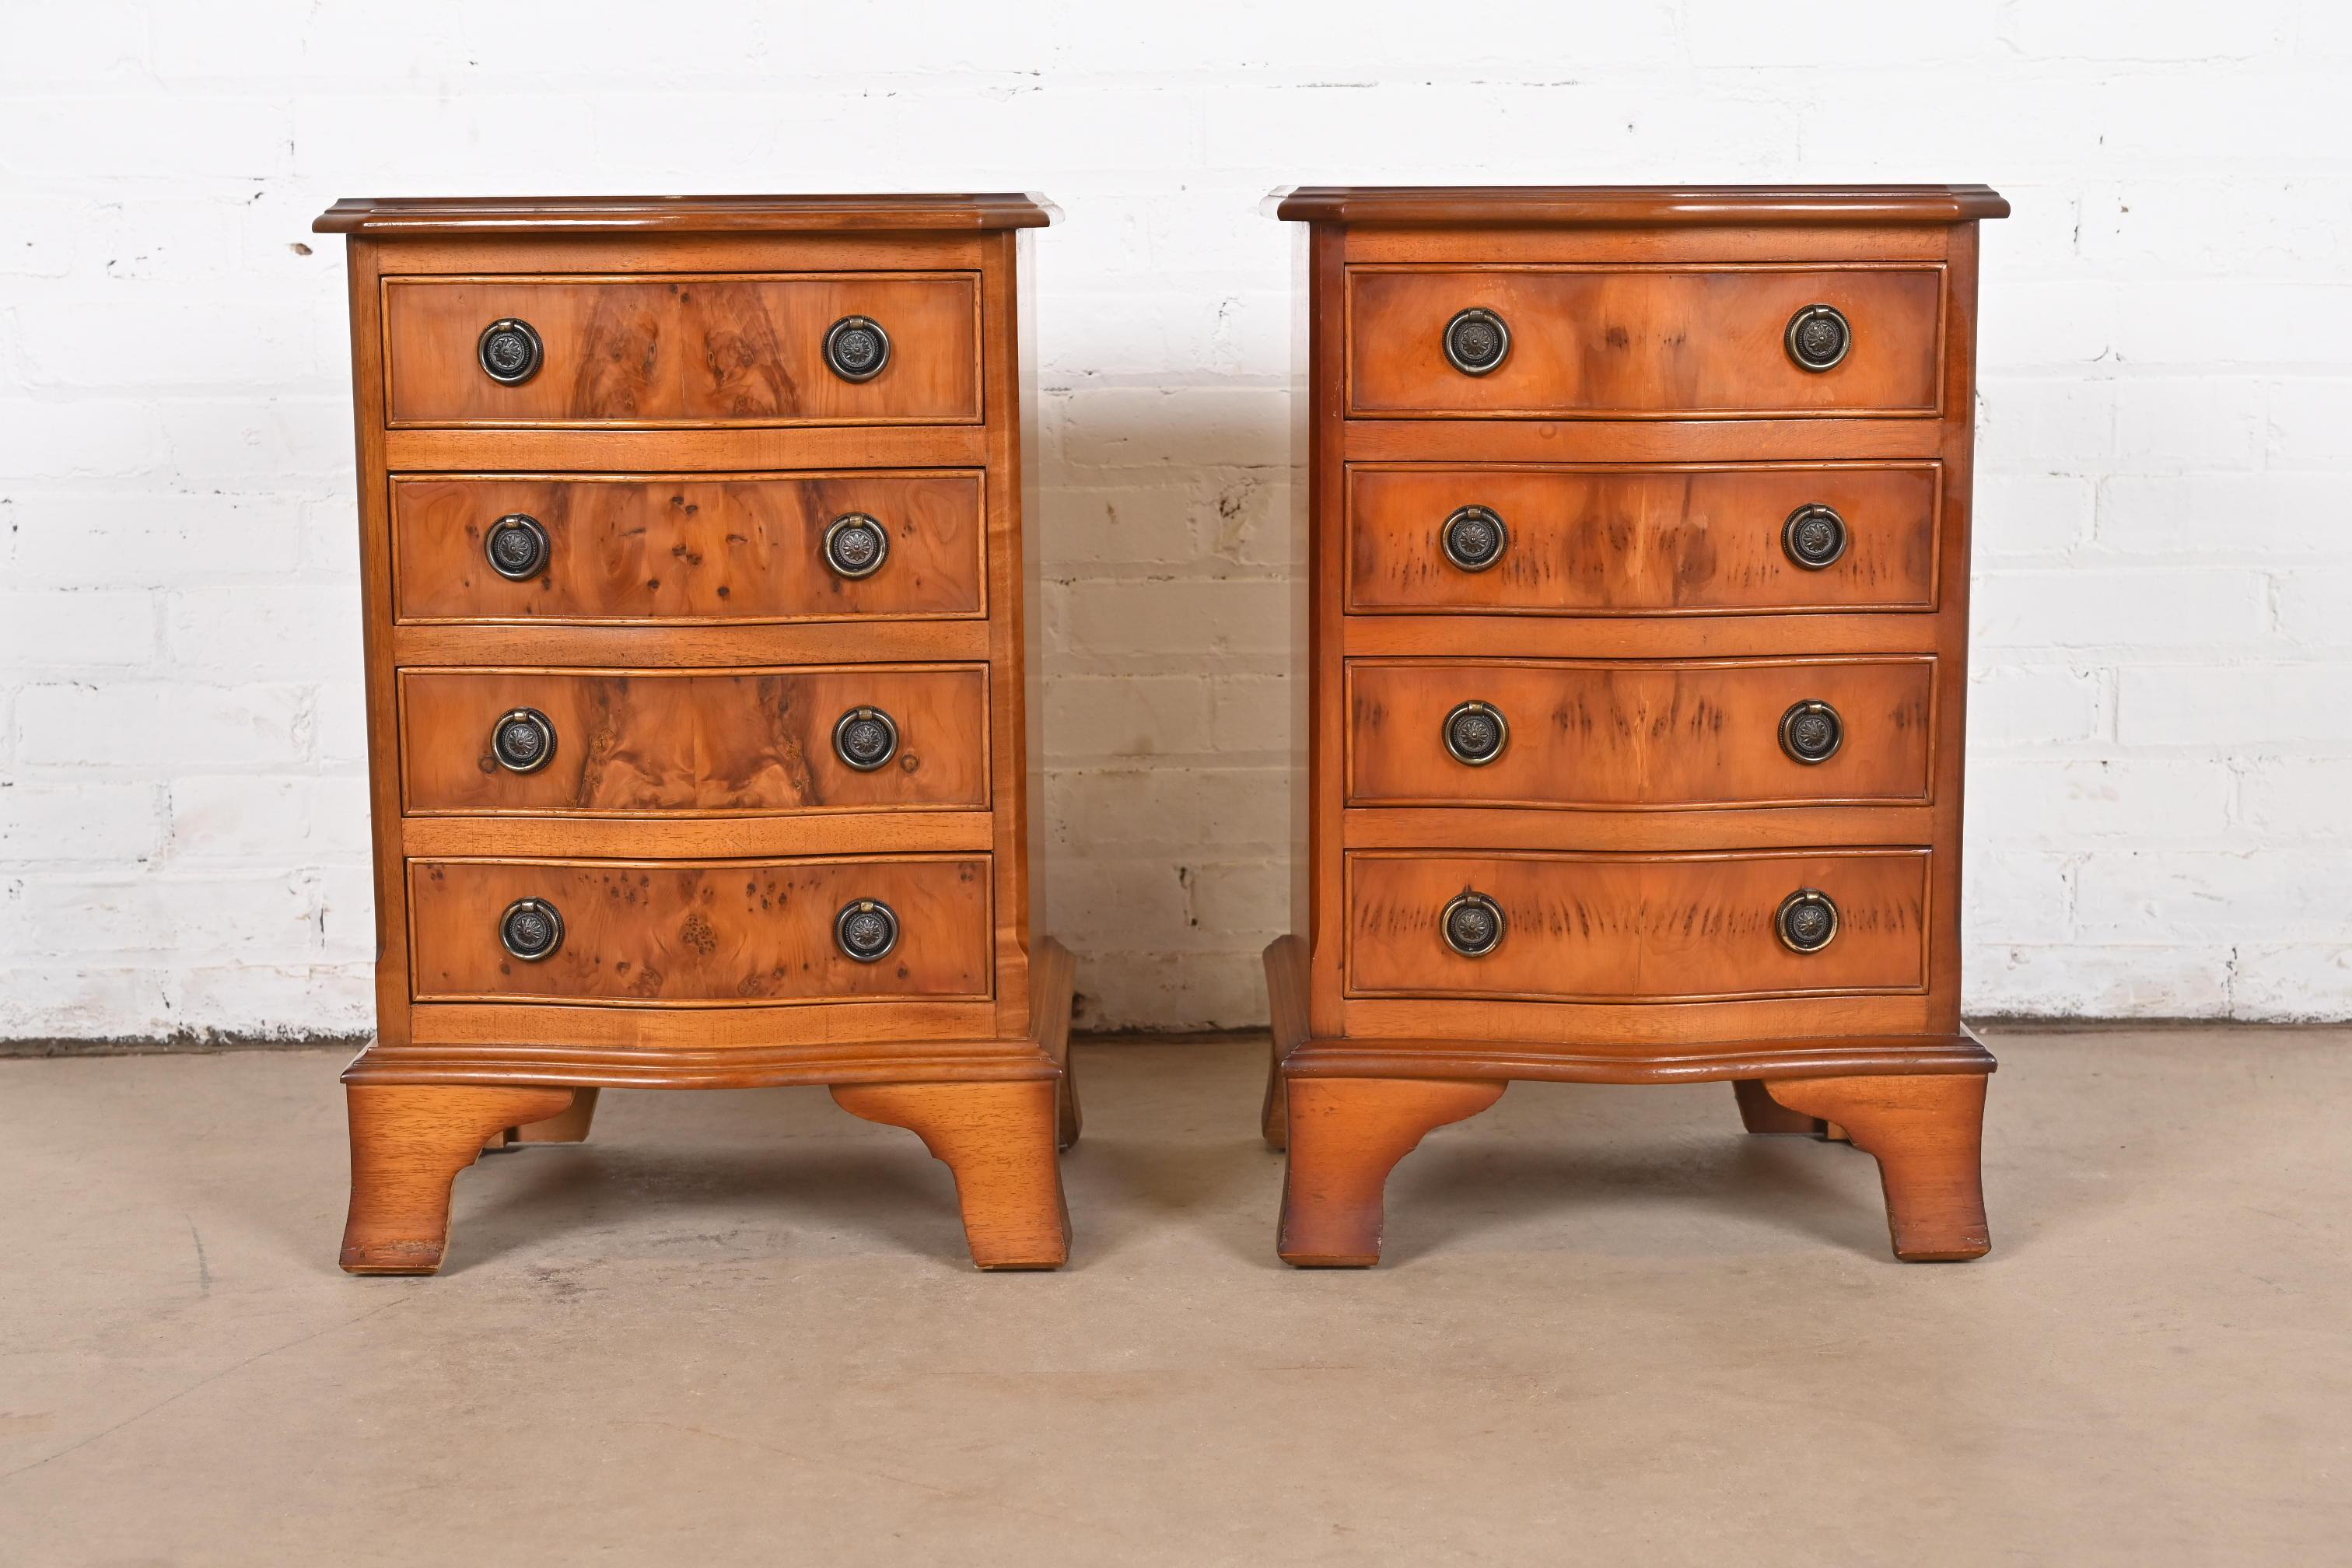 A gorgeous pair of Georgian style four-drawer diminutive bedside chests or bachelor chests

In the manner of Baker Furniture

England, Circa Mid-20th Century

Beautiful burled English yew wood, with original brass hardware.

Measures: 16